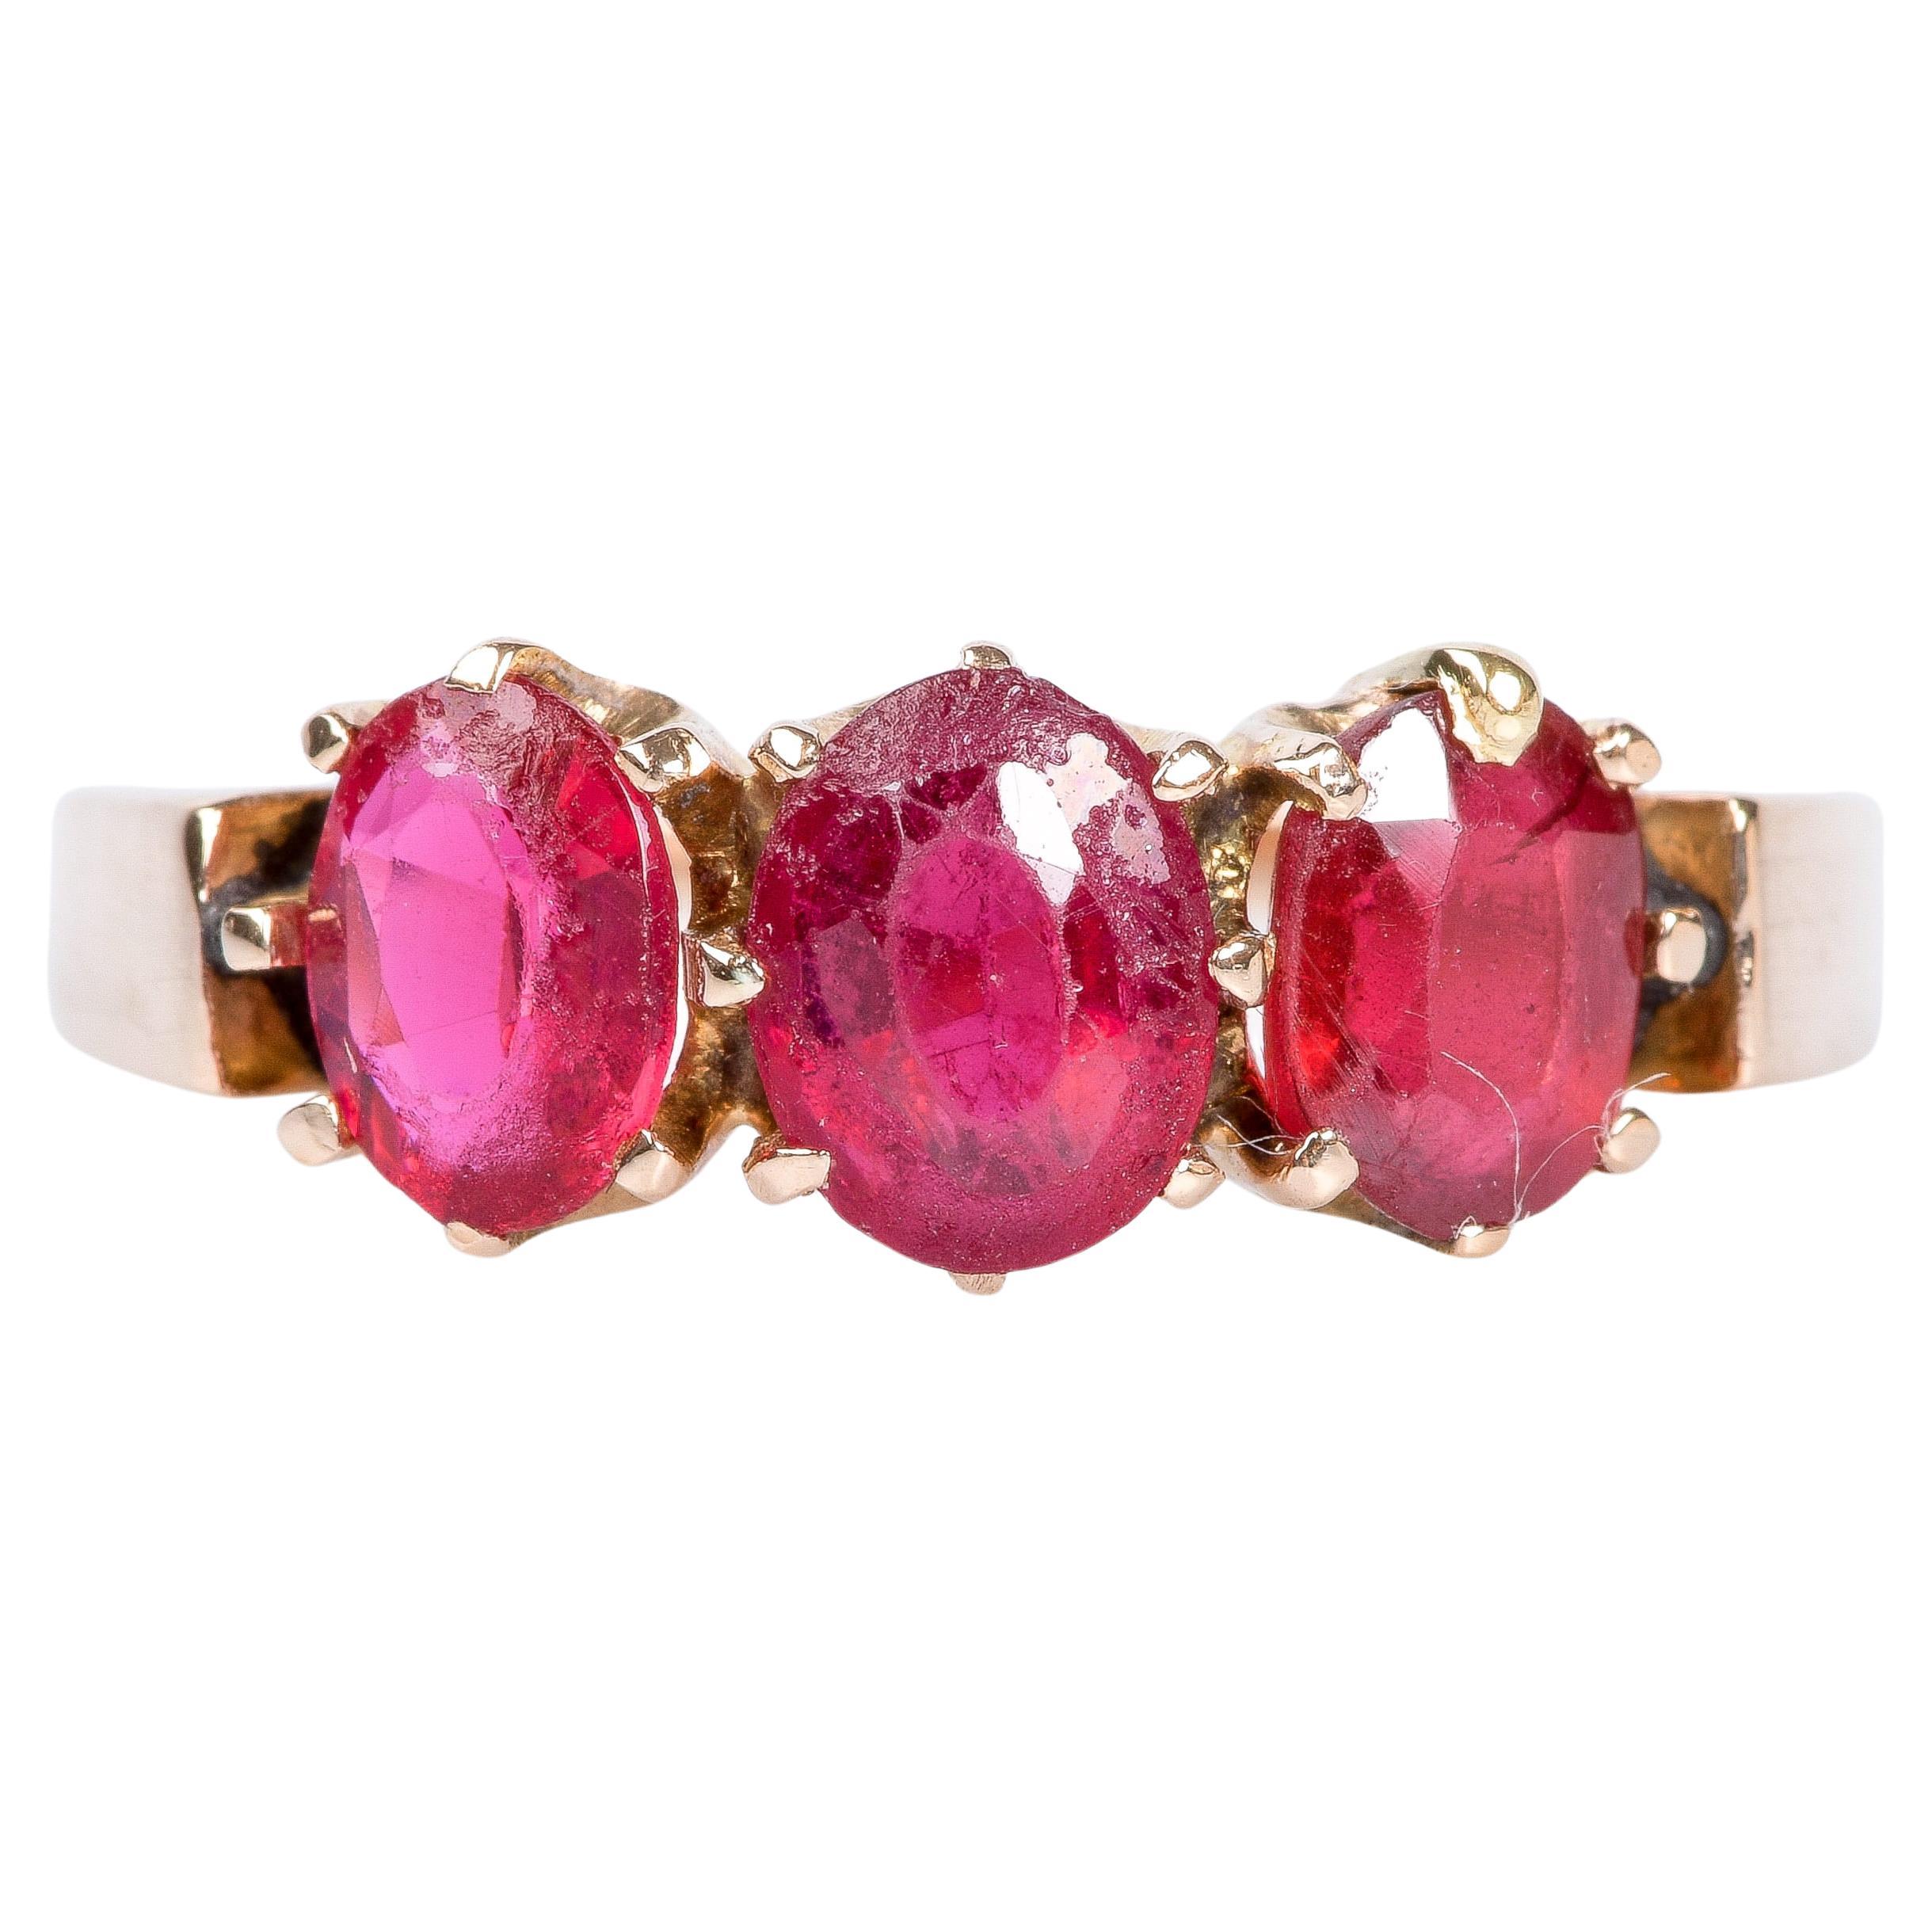 18-carats pink gold ring with 3 oval rubies of 0.66 carats total